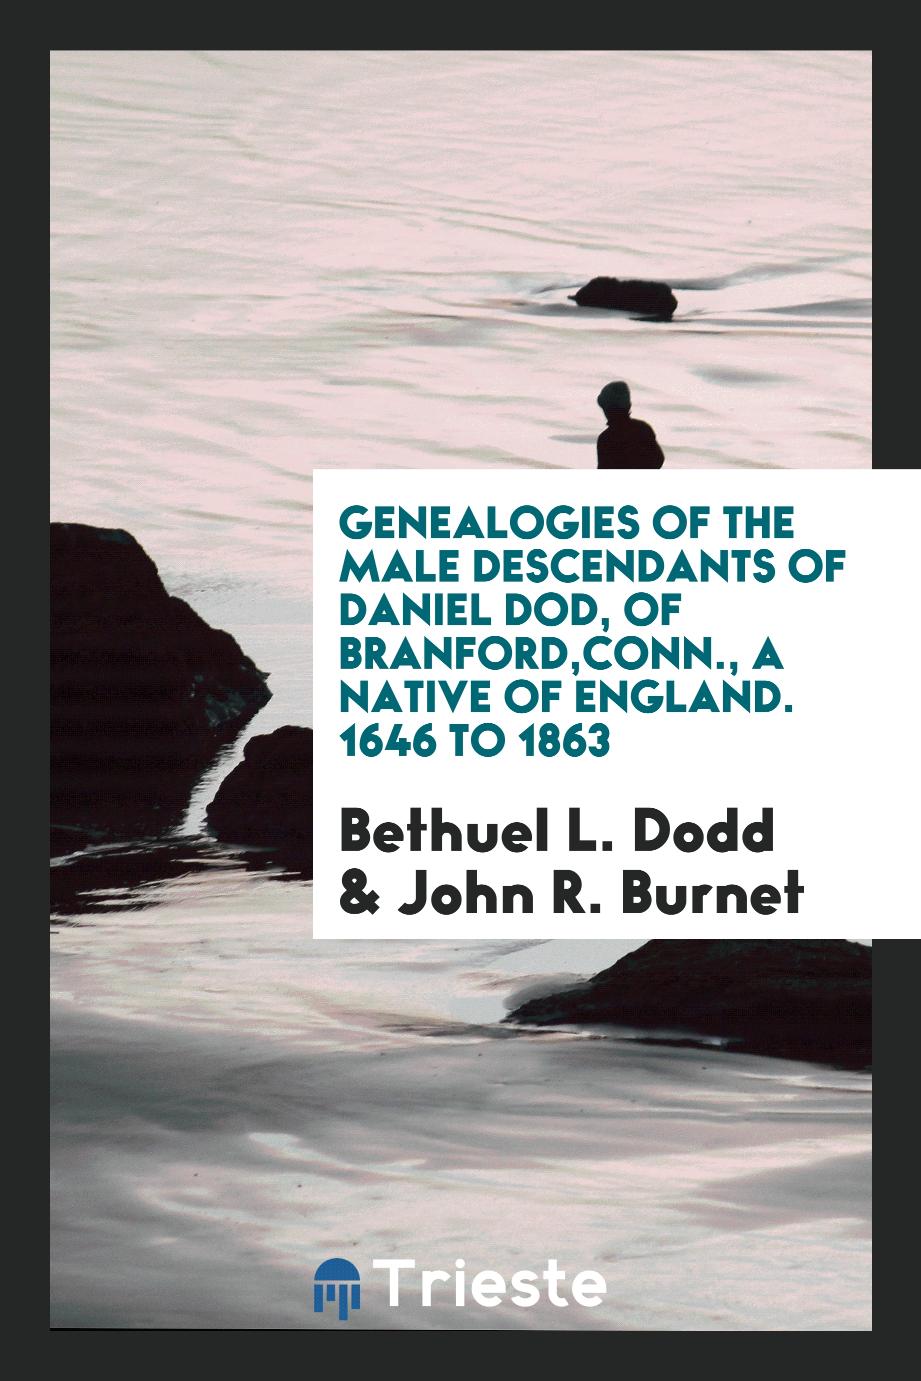 Genealogies of the male descendants of Daniel Dod, of Branford,Conn., a native of England. 1646 to 1863